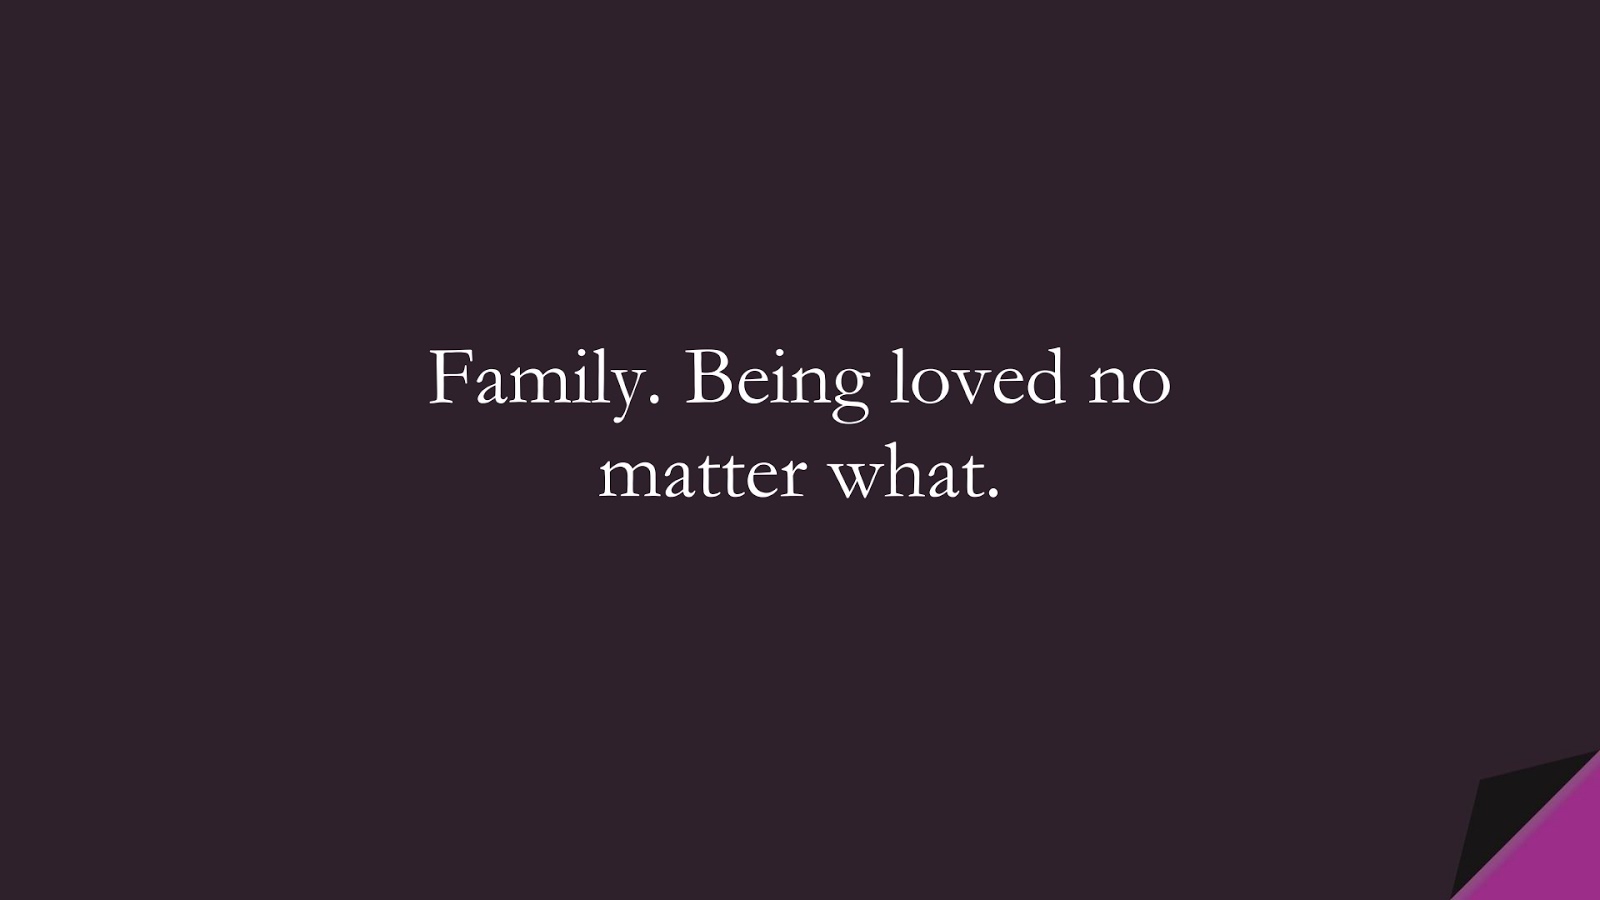 Family. Being loved no matter what.FALSE